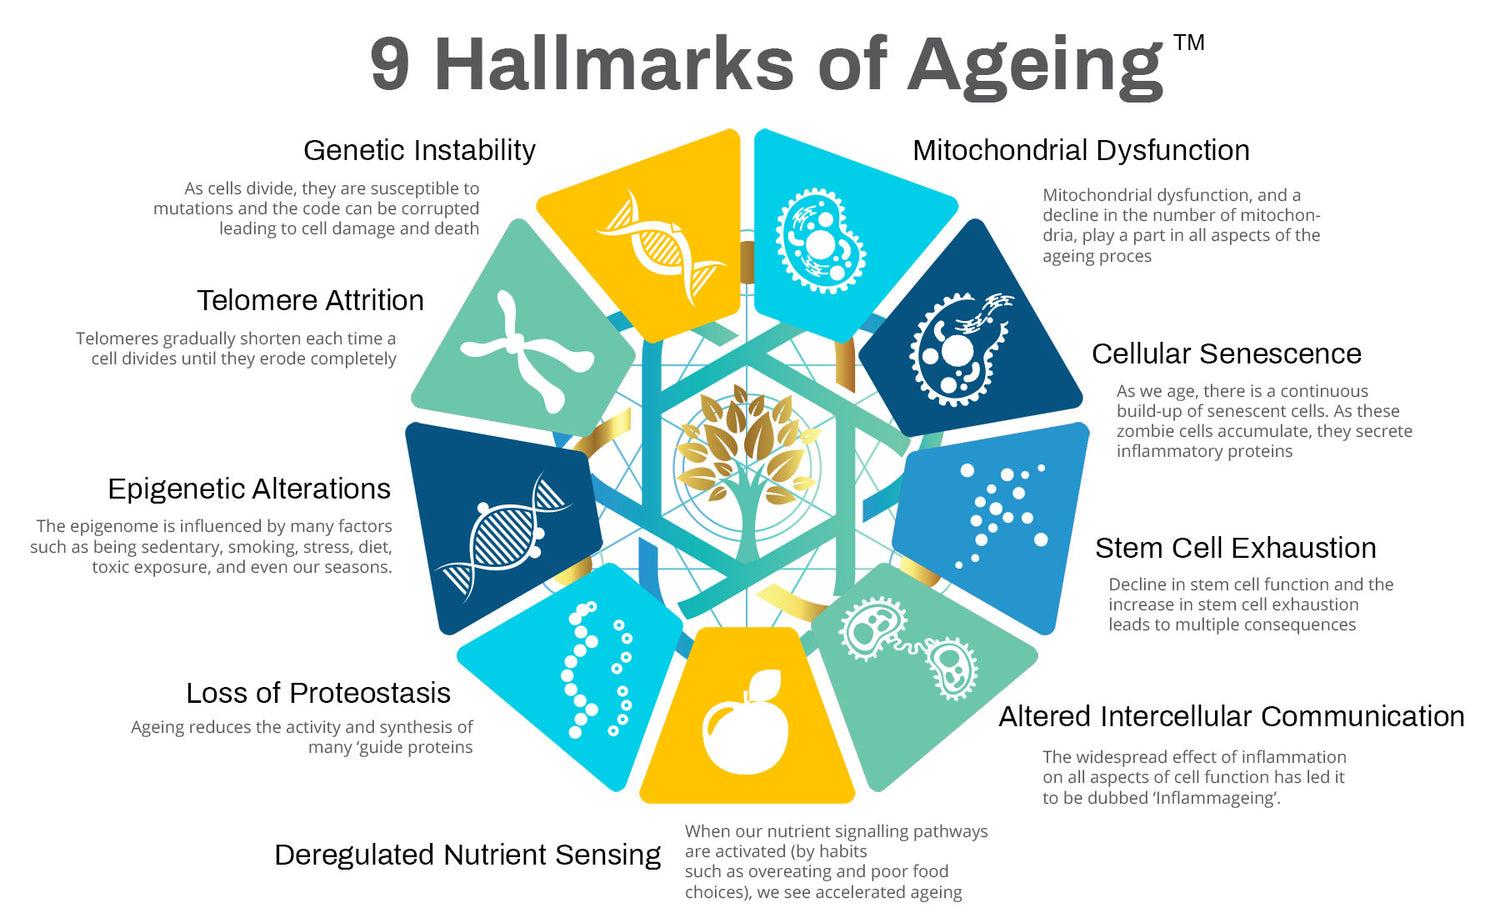 9 Hallmarks of Ageing